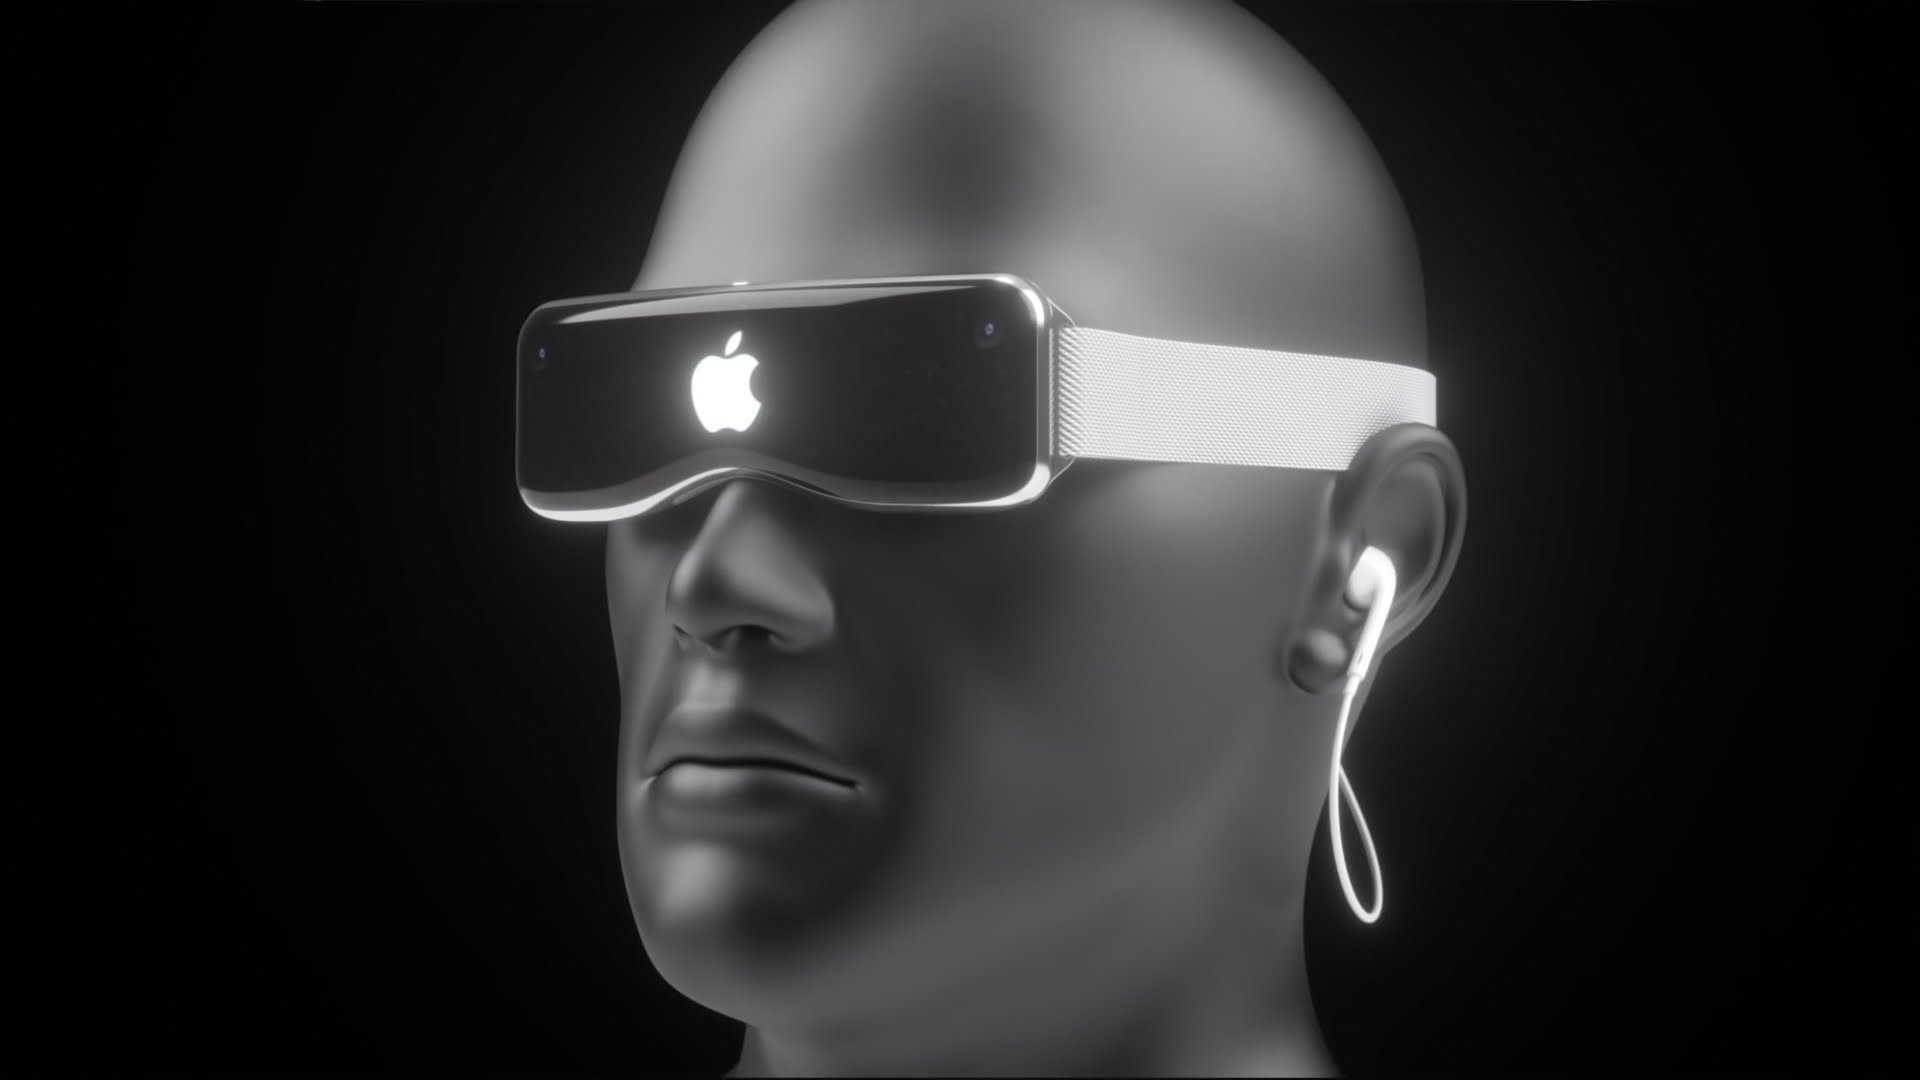 Bloomberg: Apple's AR-glasses and Macs with their own chips will arrive in 2020